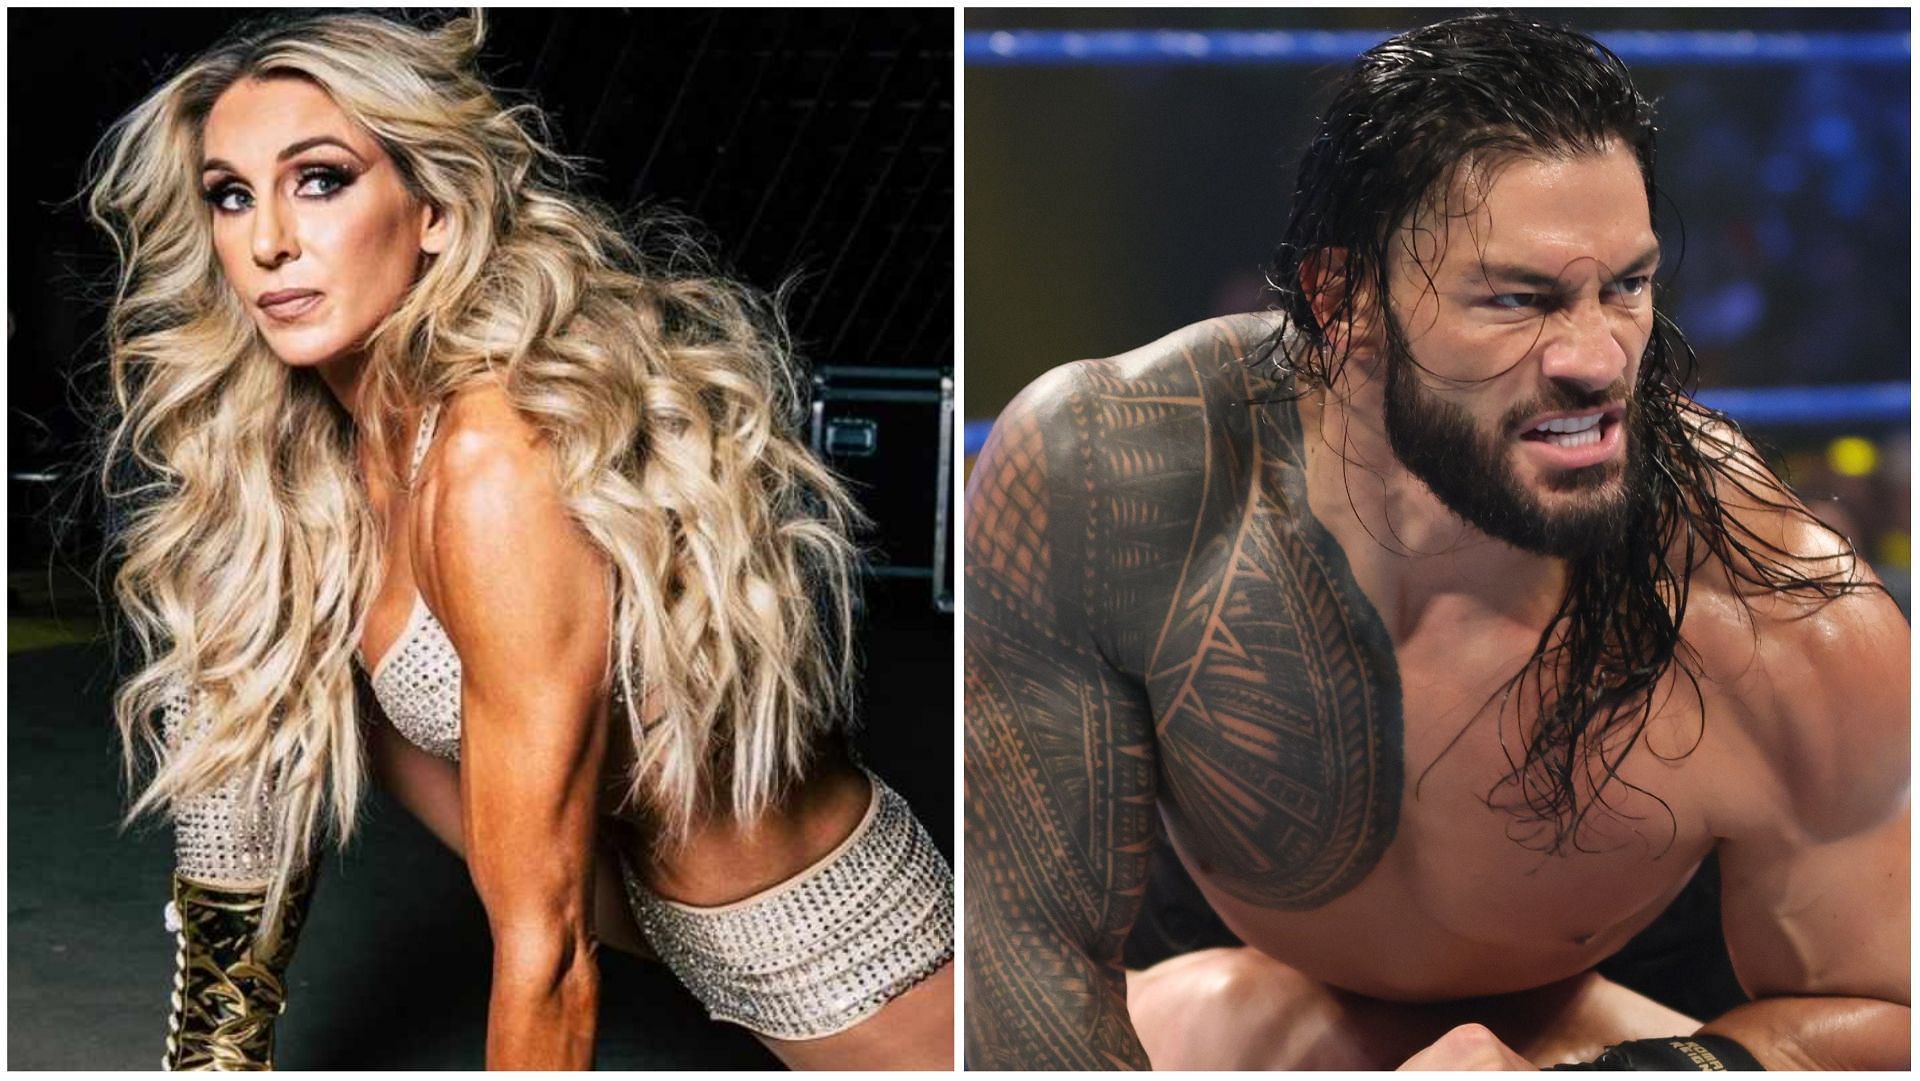 WWE Superstars Charlotte Flair and Roman Reigns